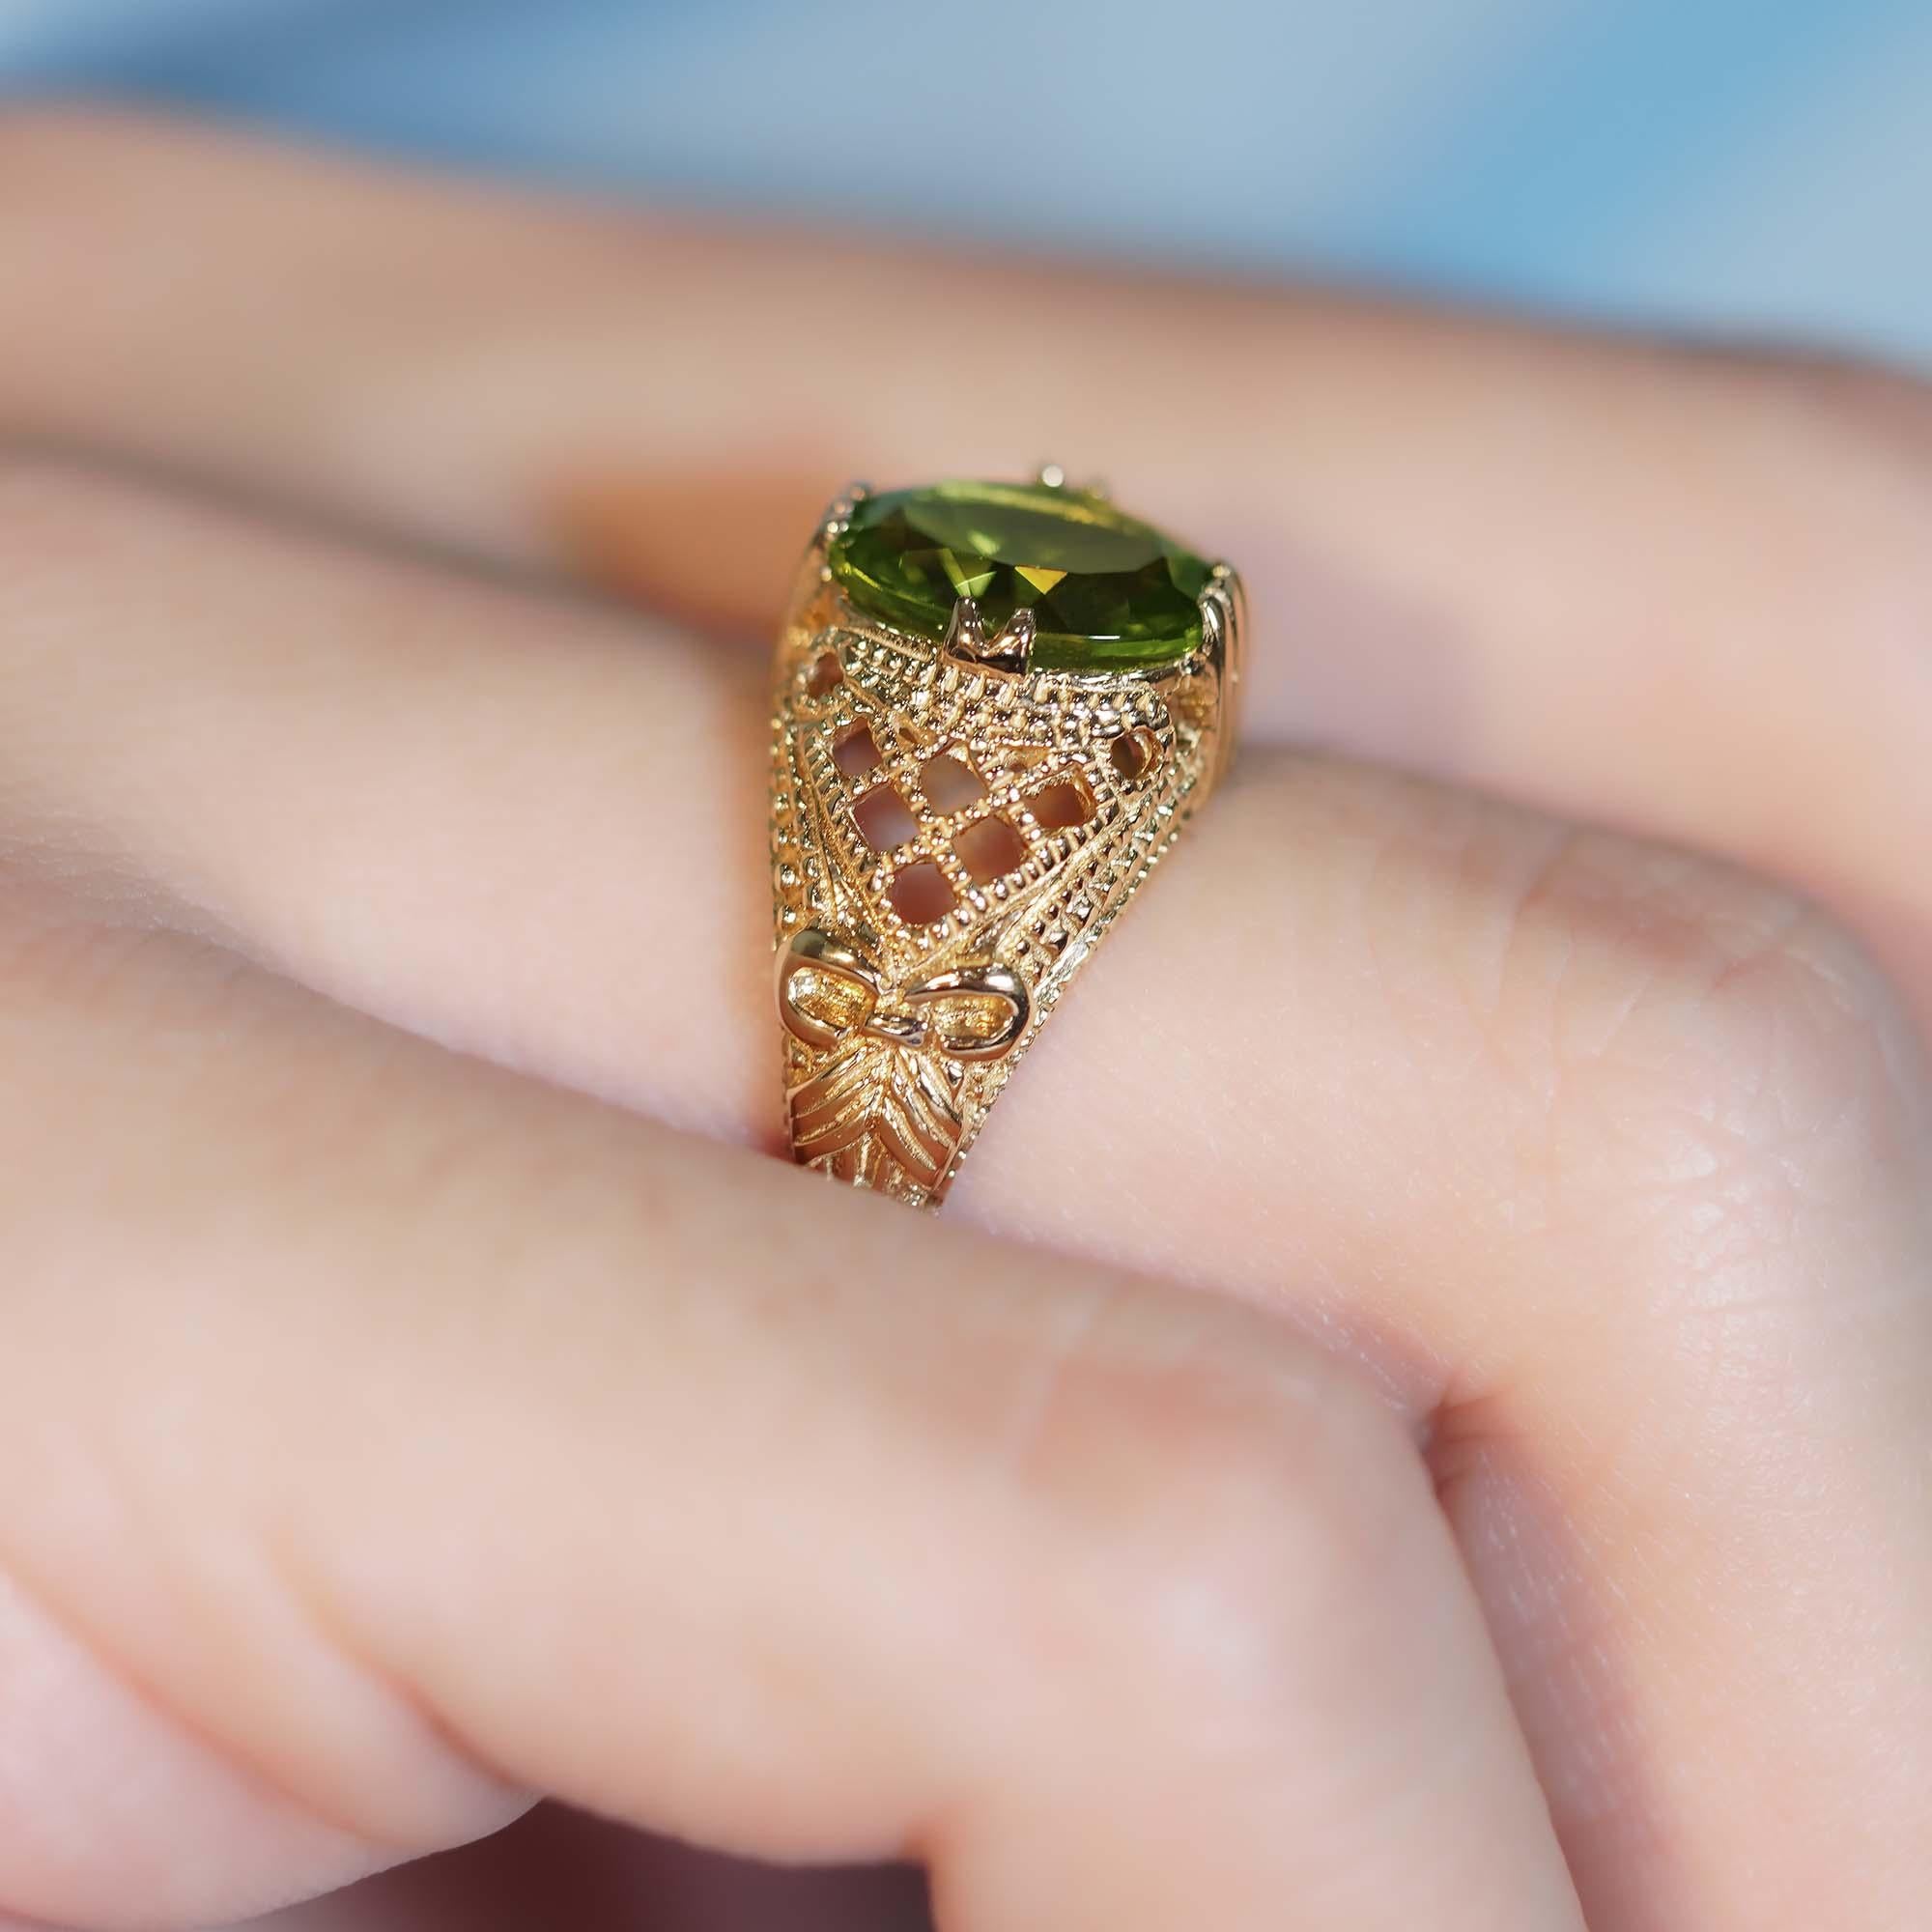 For Sale:  Natural Peridot Vintage Style Filigree Cocktail Ring in 9K Yellow Gold 9